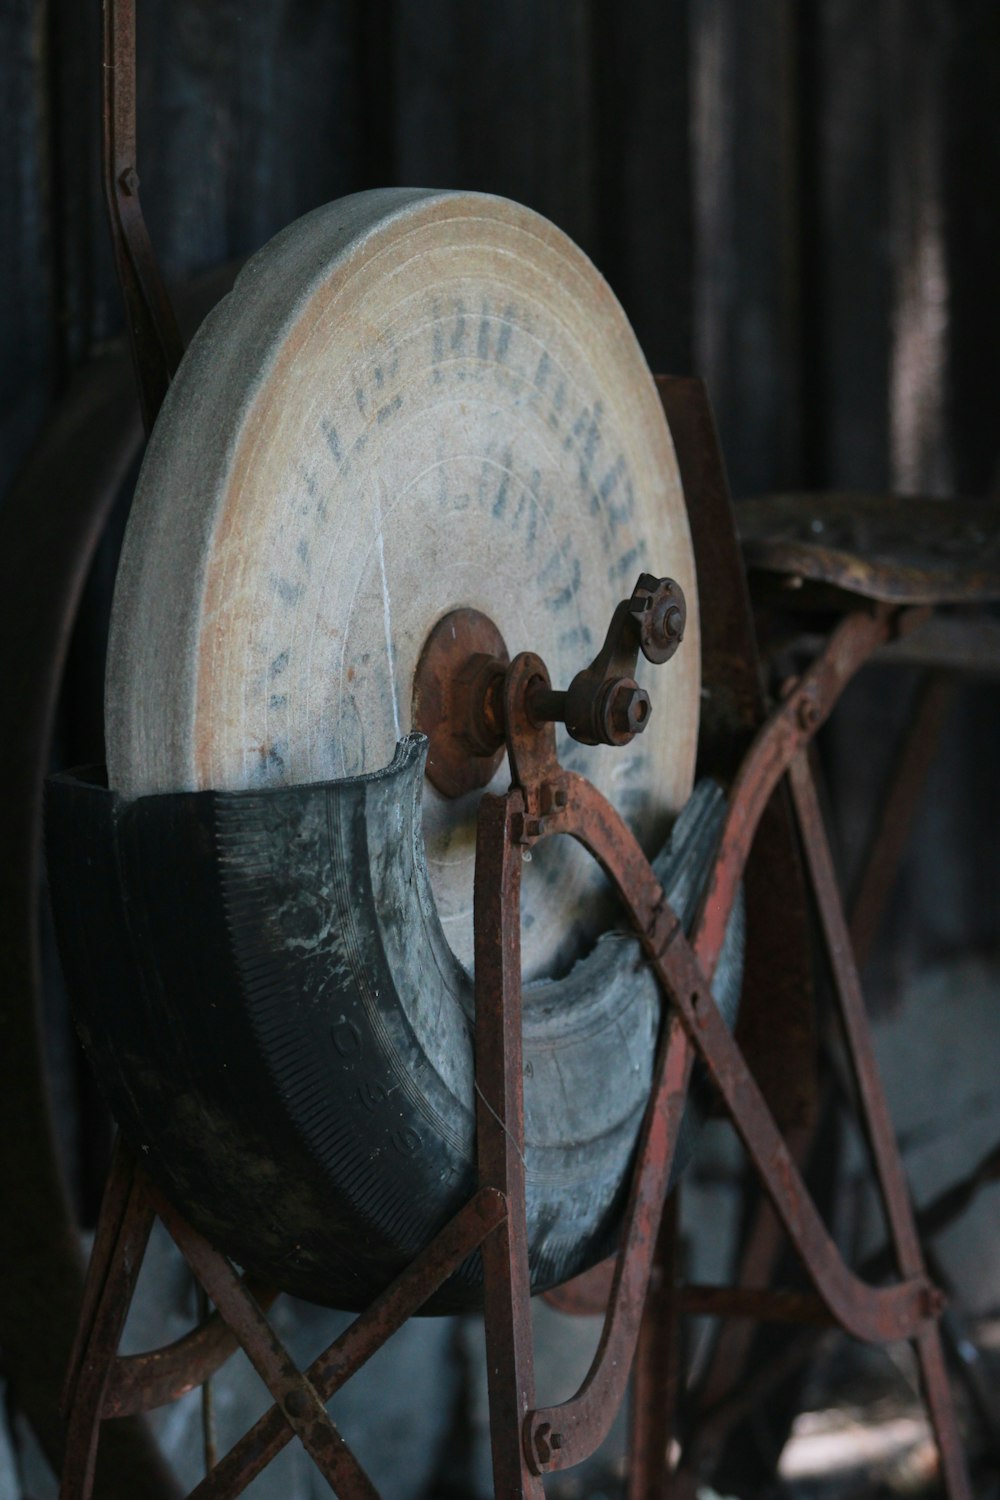 an old spinning wheel on a metal stand